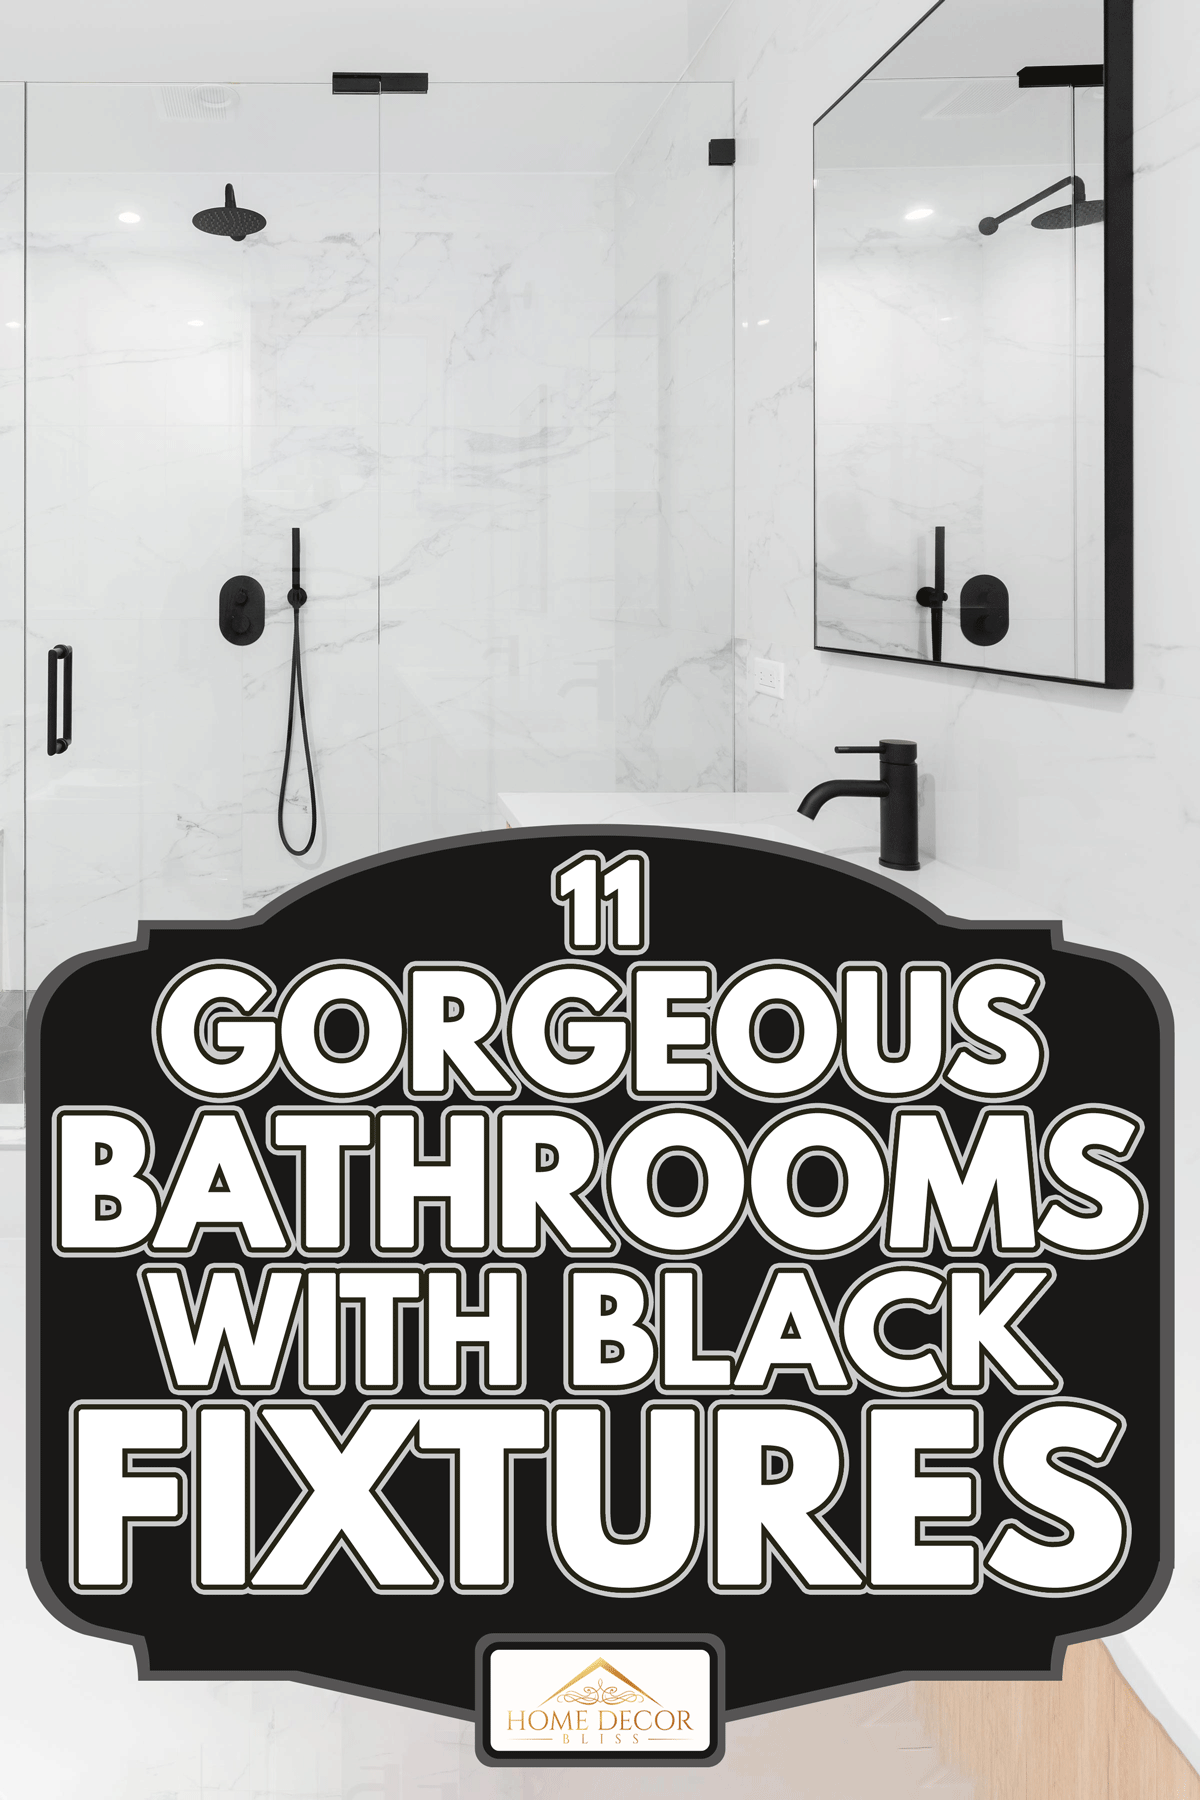 A modern bathroom with a light wood cabinet, walk-in shower with marble tiled walls, and black faucets and hardware, 11 Gorgeous Bathrooms With Black Fixtures